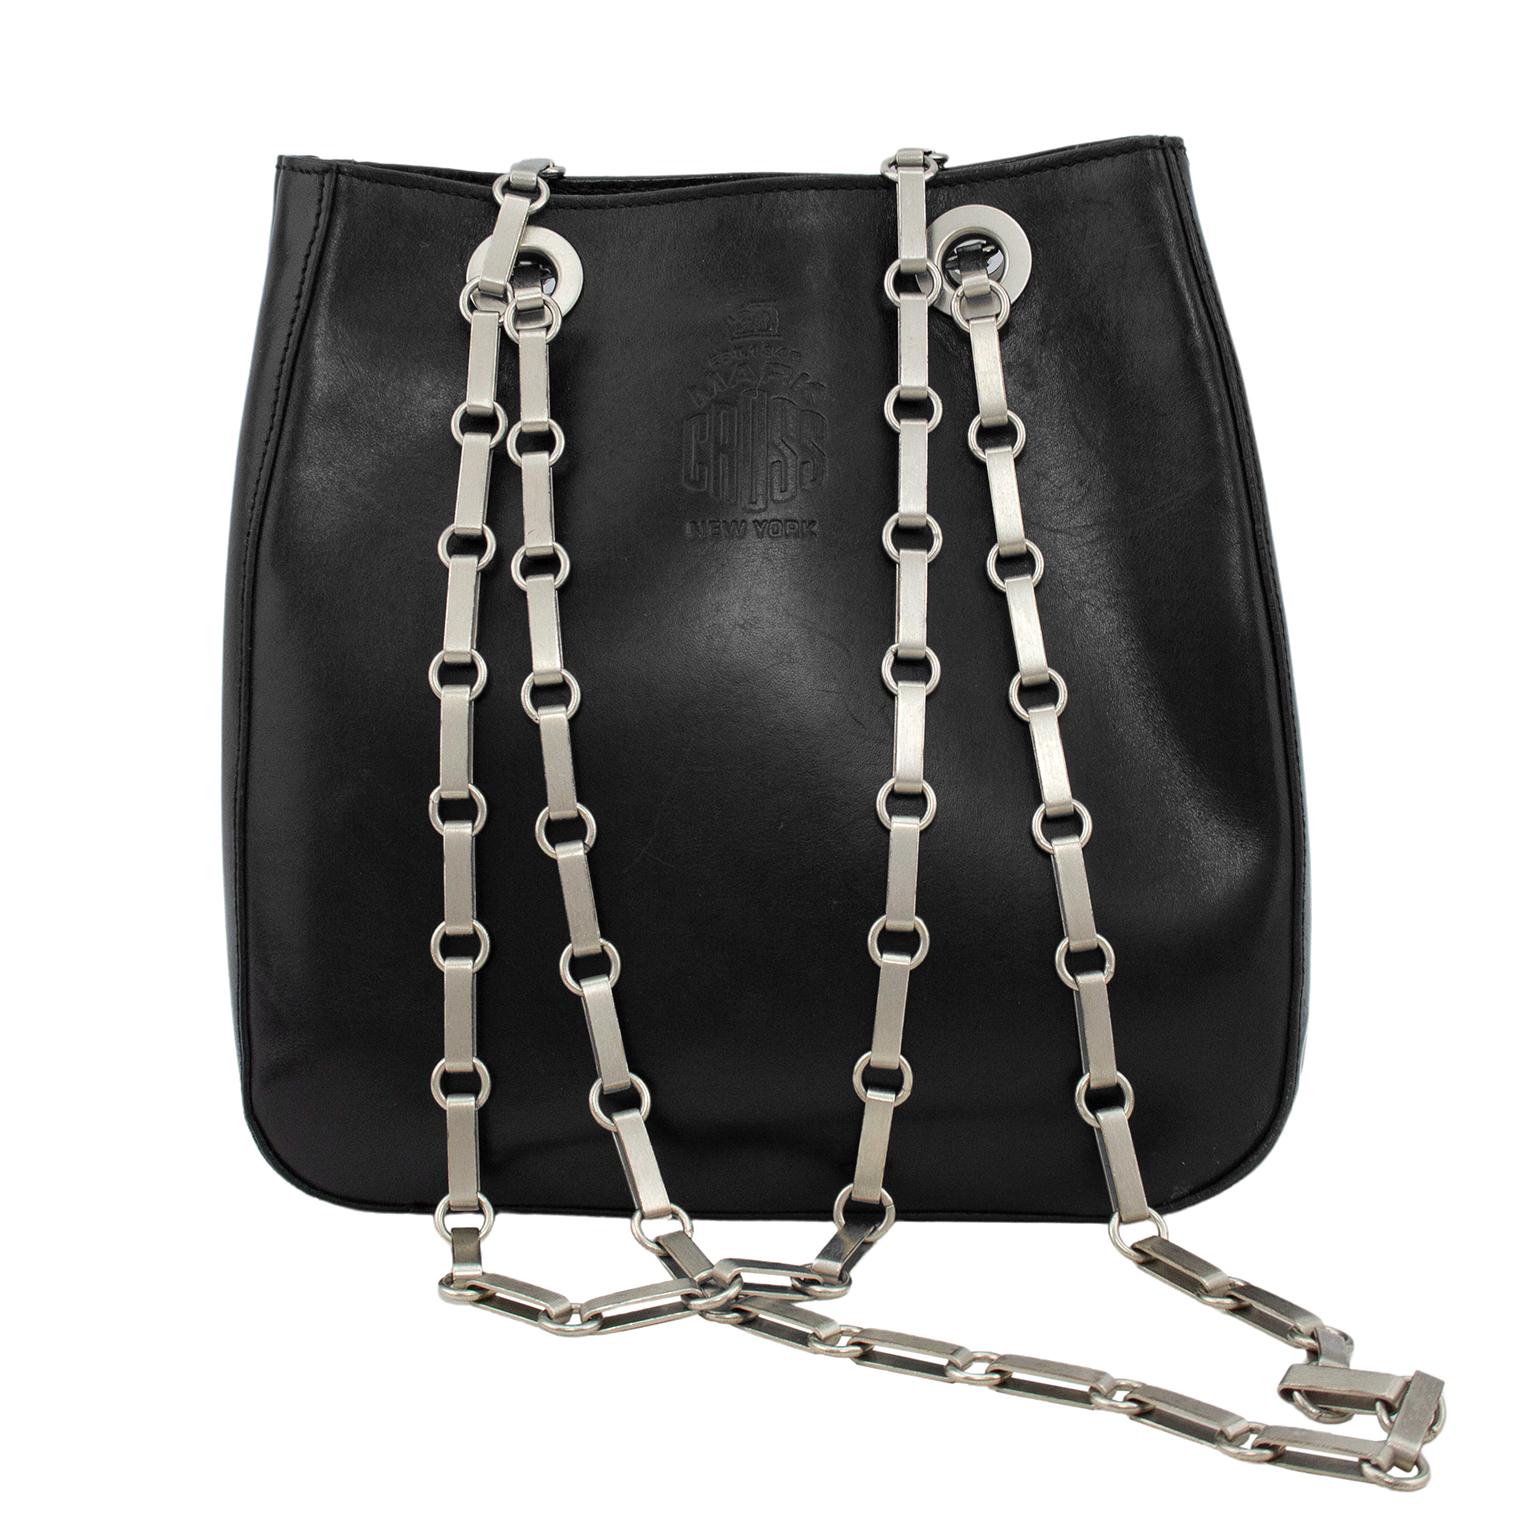 Mark Cross 1990’s black leather small bucket bag with silver flat link double chain handles. Can be worn with the chains doubled on one shoulder or single cross body. Black semi polished leather with blind stamped Mark Cross logo on the exterior.